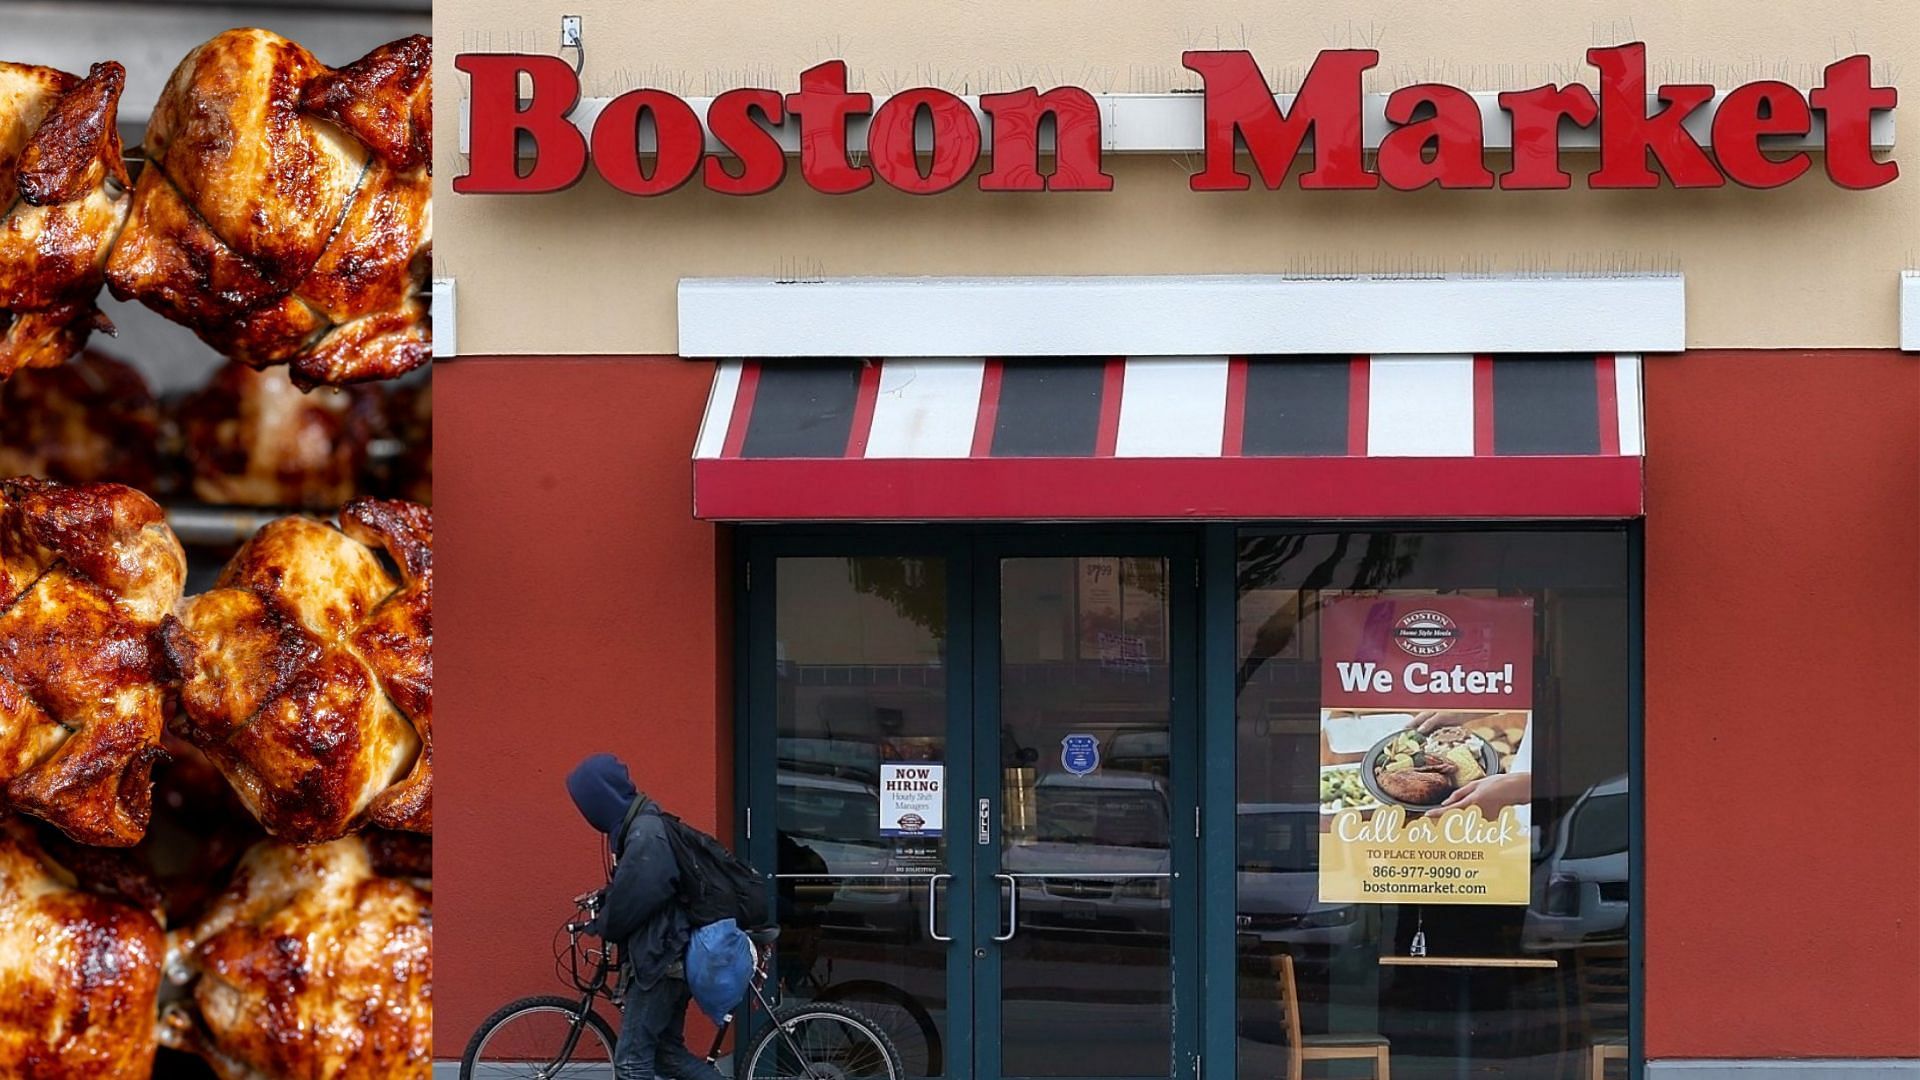 Boston Market celebrates its 37th anniversary with special anniversary offers (Image via Olivier Douliery/AFP/GettyImages)